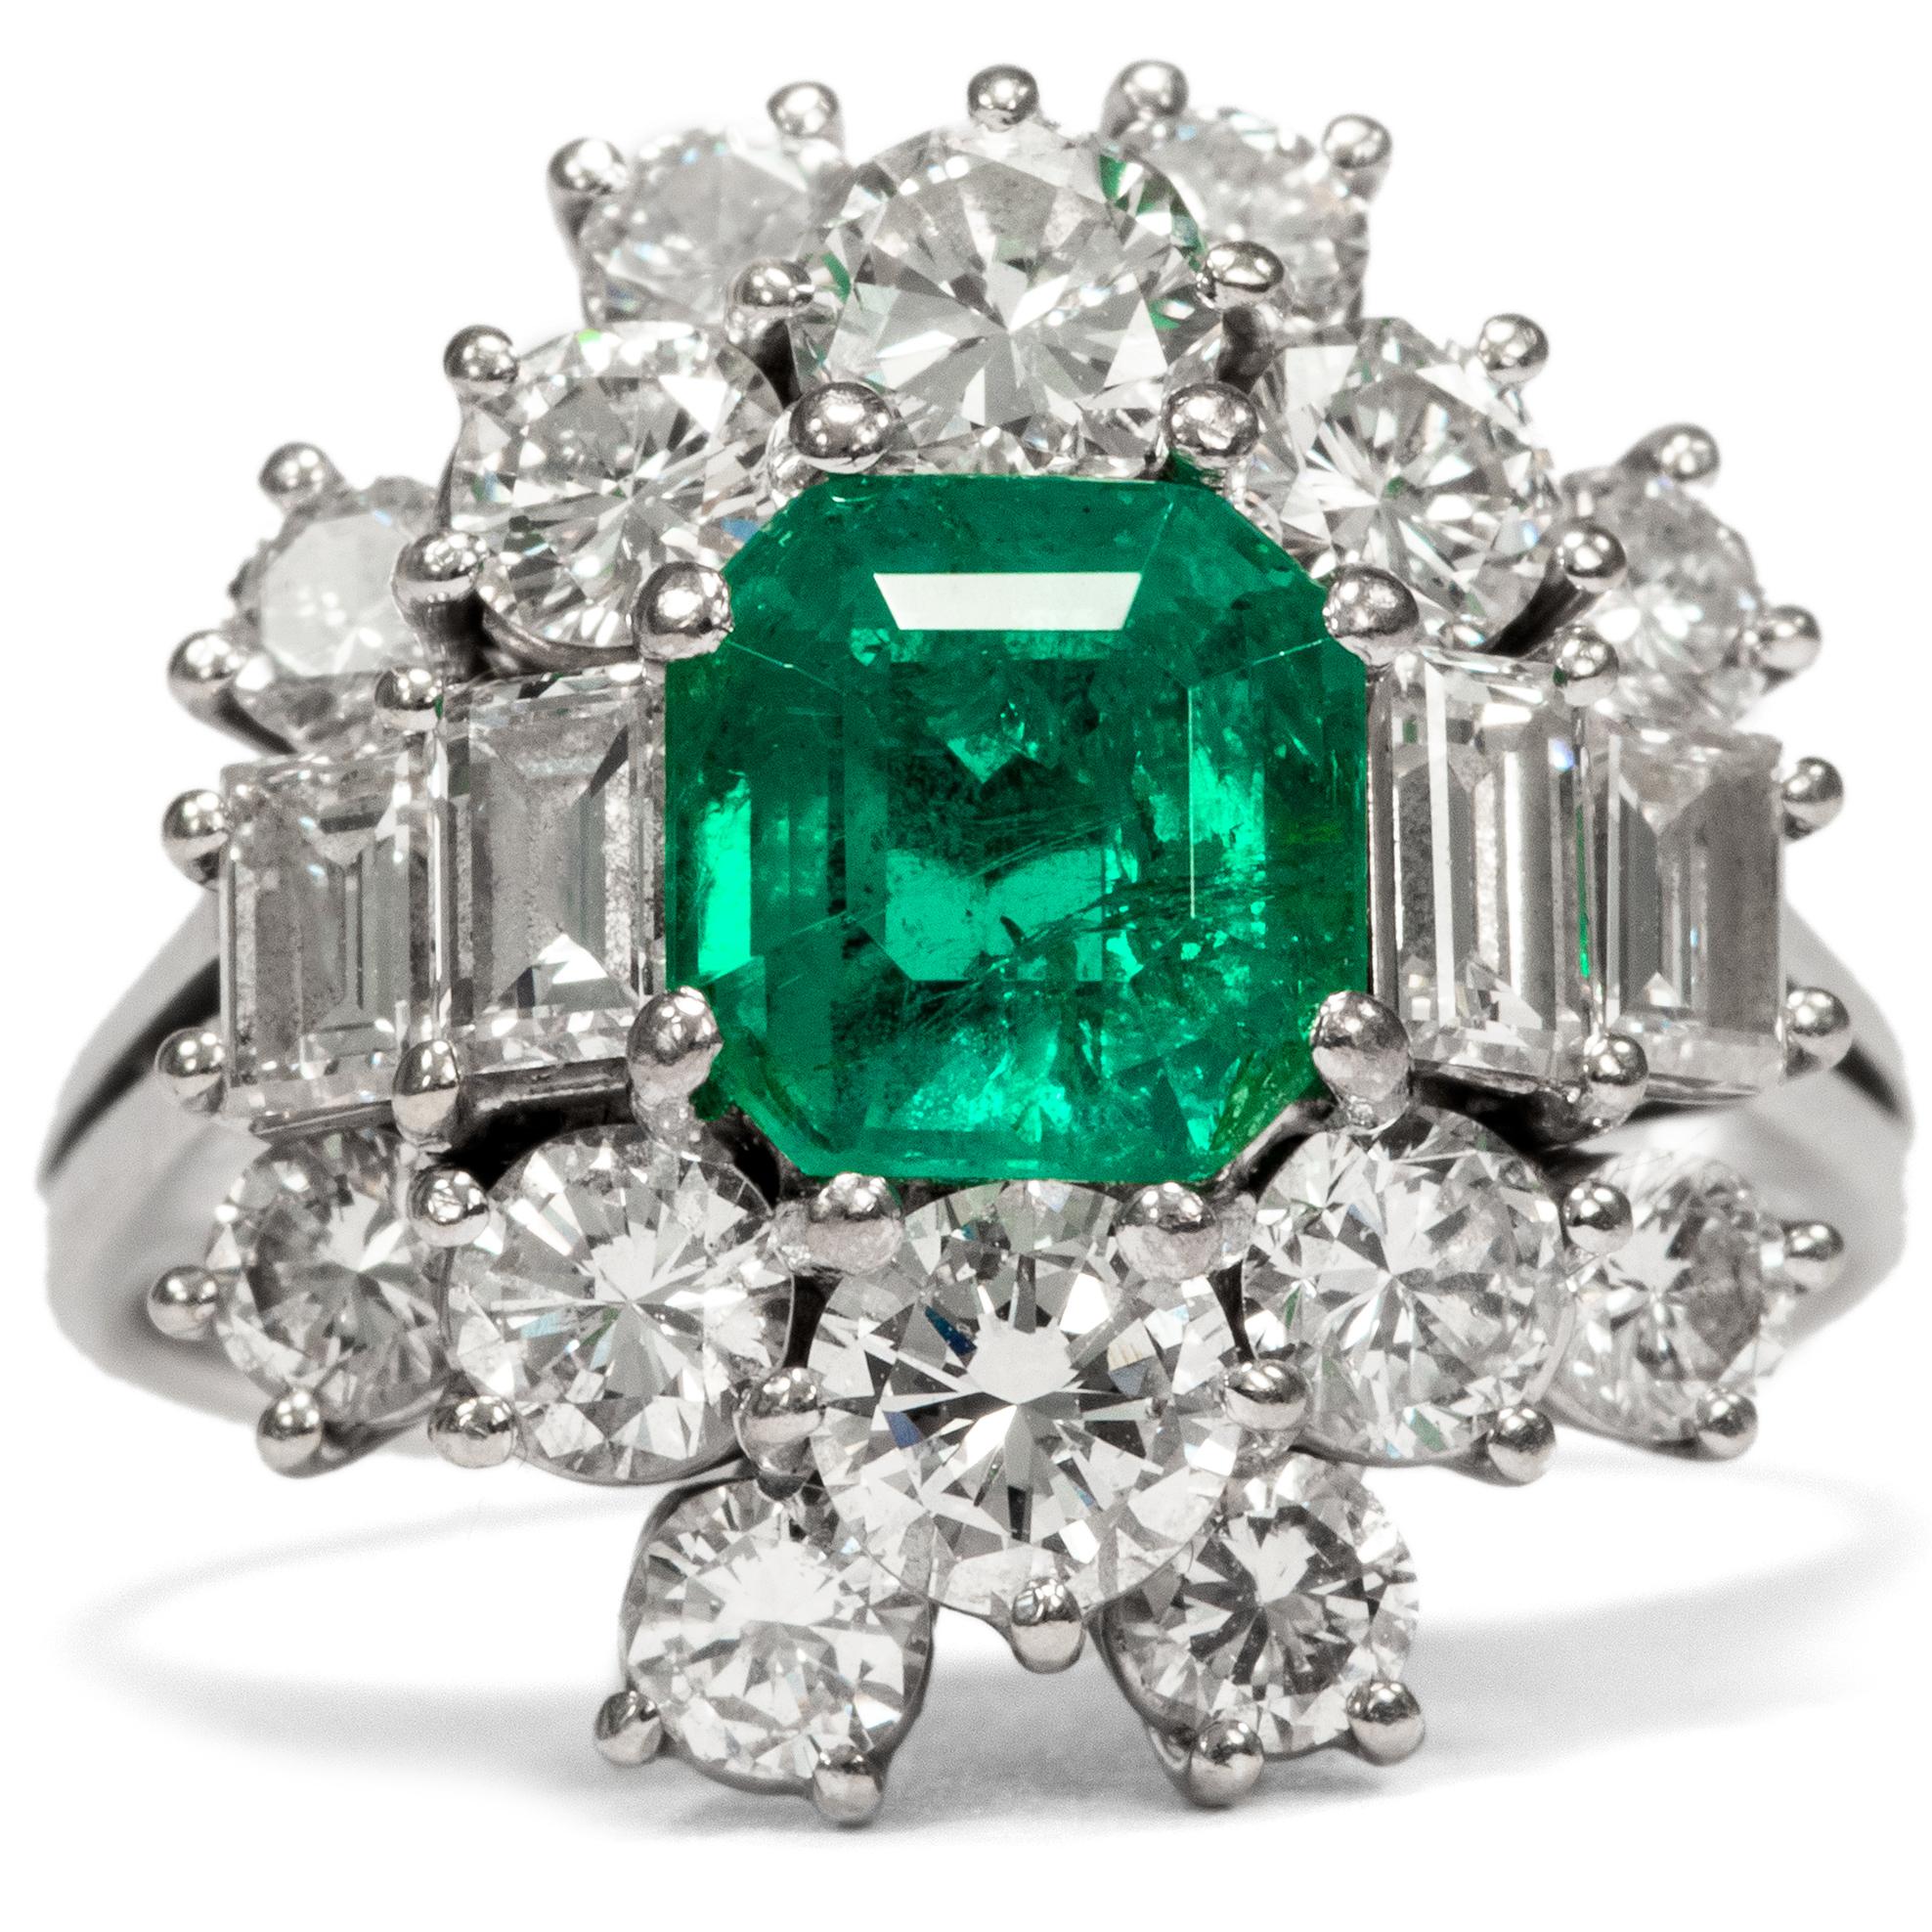 This exquisite ring is a creative interpretation of the classic cluster ring. At its centre is a luminous green emerald, beautifully clear and weighing 1.30 ct. 18 diamonds in brilliant and baguette cuts surround the central gemstone, weighing 2.57